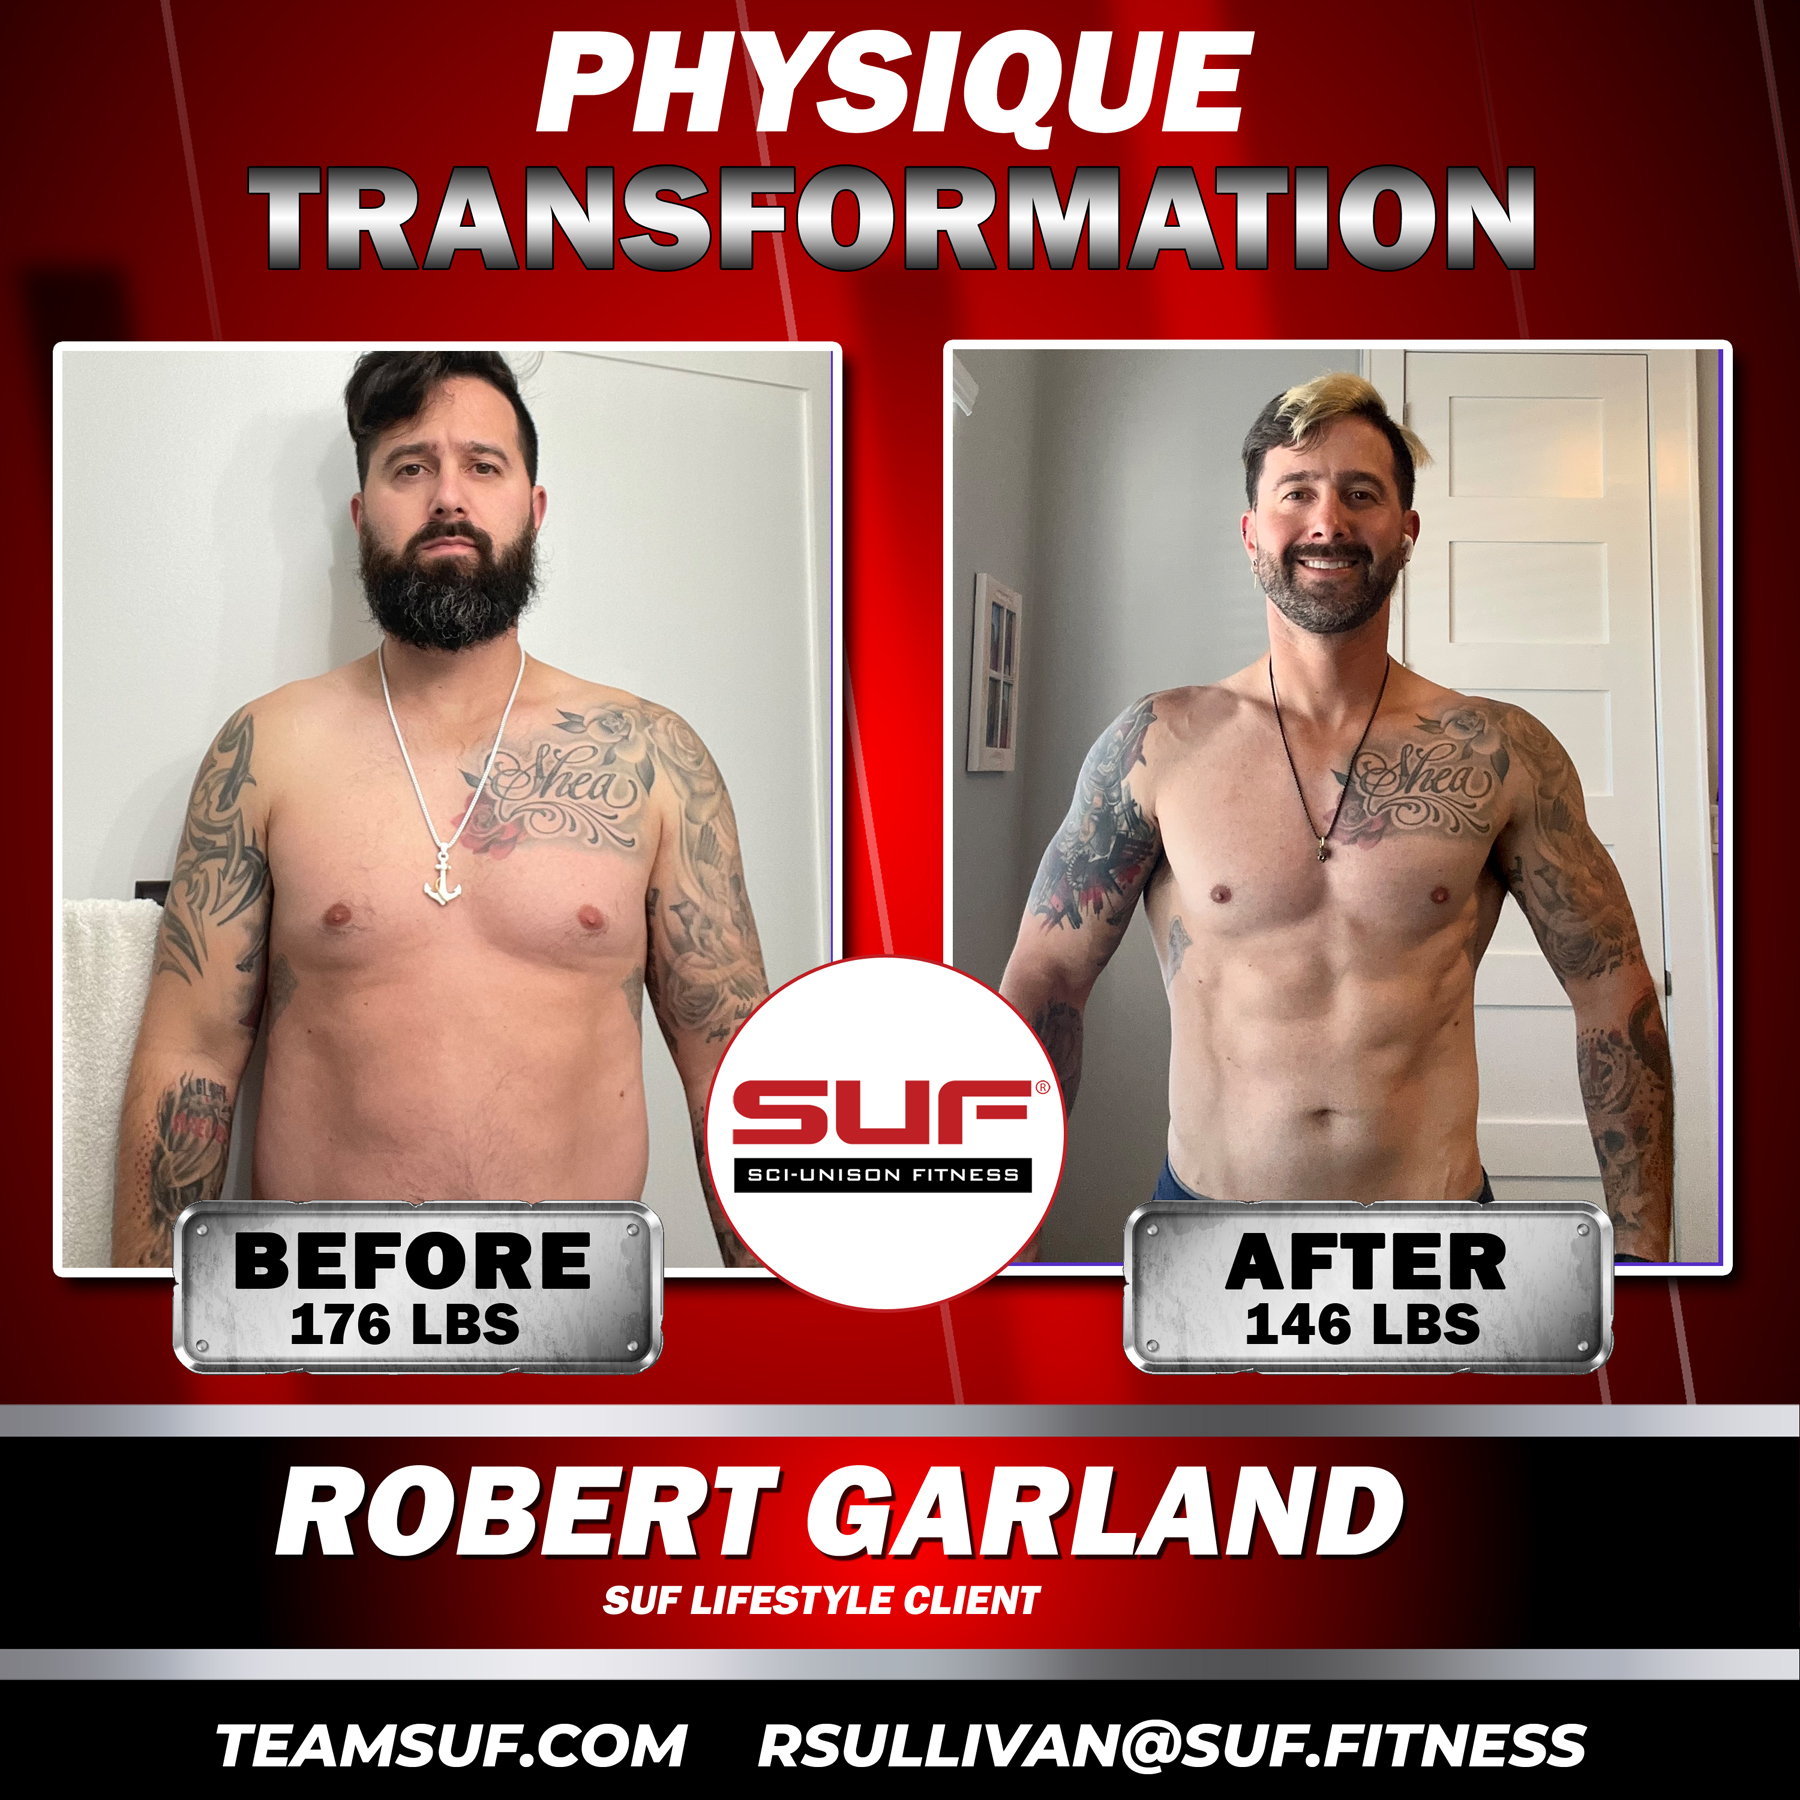 Team SUF Physique weight loss transformation natural bodybuilding.